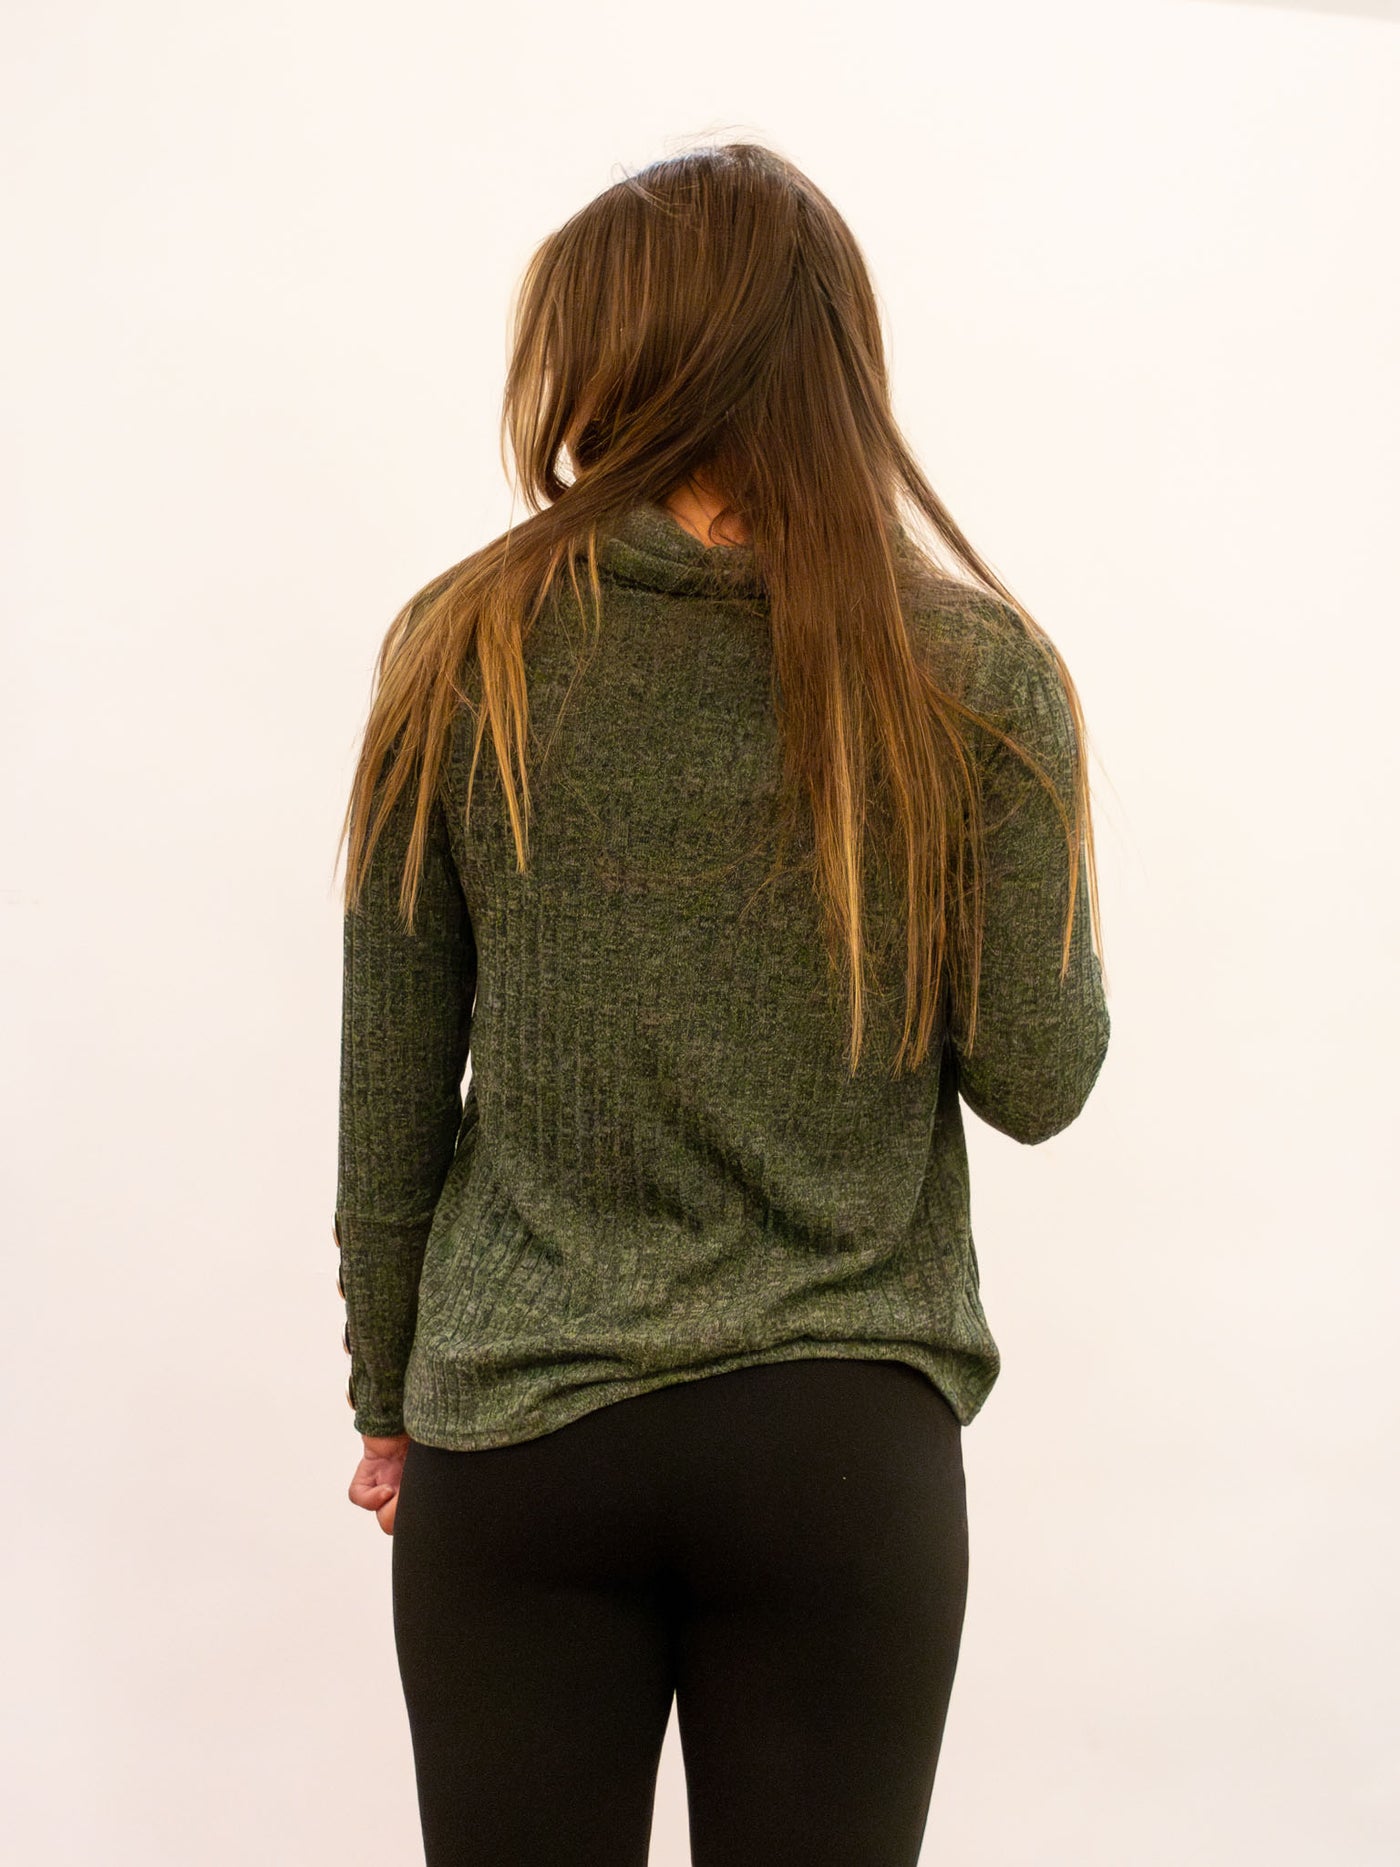 A model wearing an olive green sweater with a cowl neck detail. The model has it paired with black leggings.